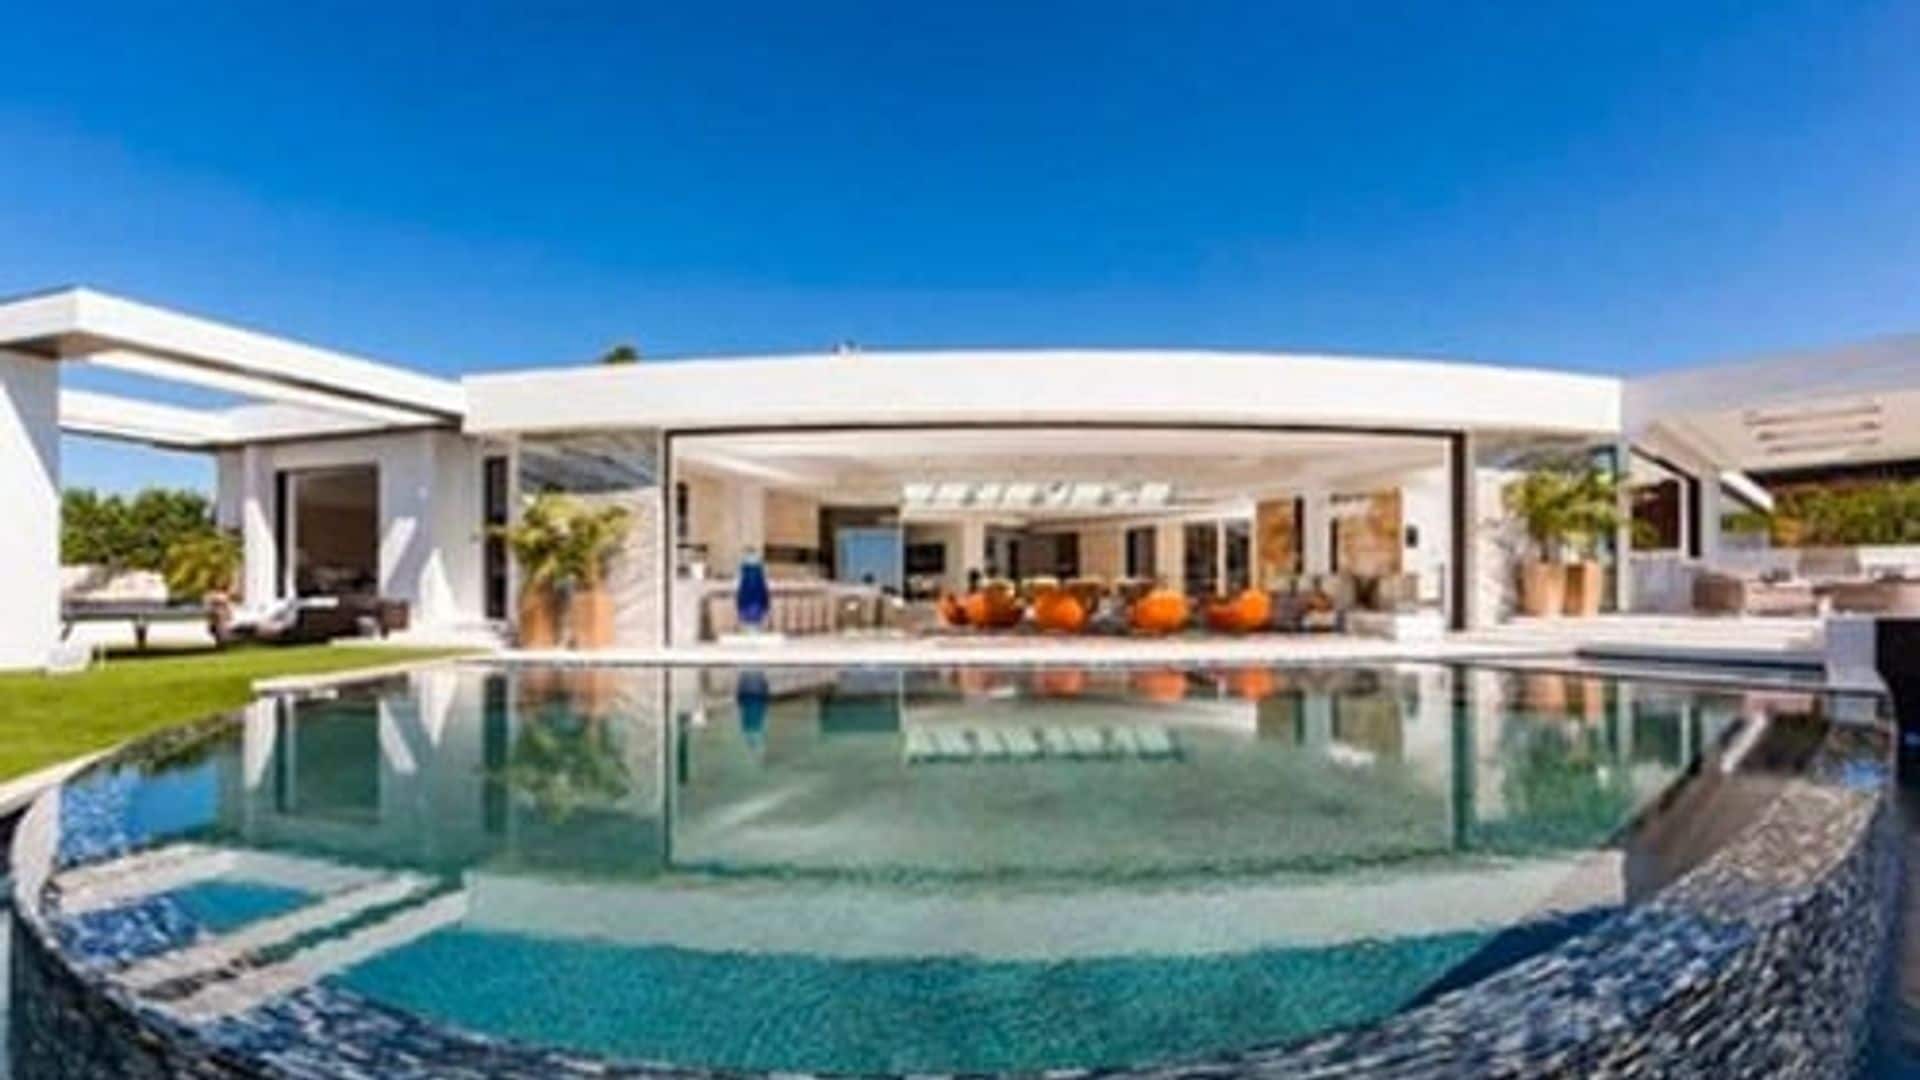 LISTED: Beyoncé and Jay Z may purchase this $85 million Beverly Hills property